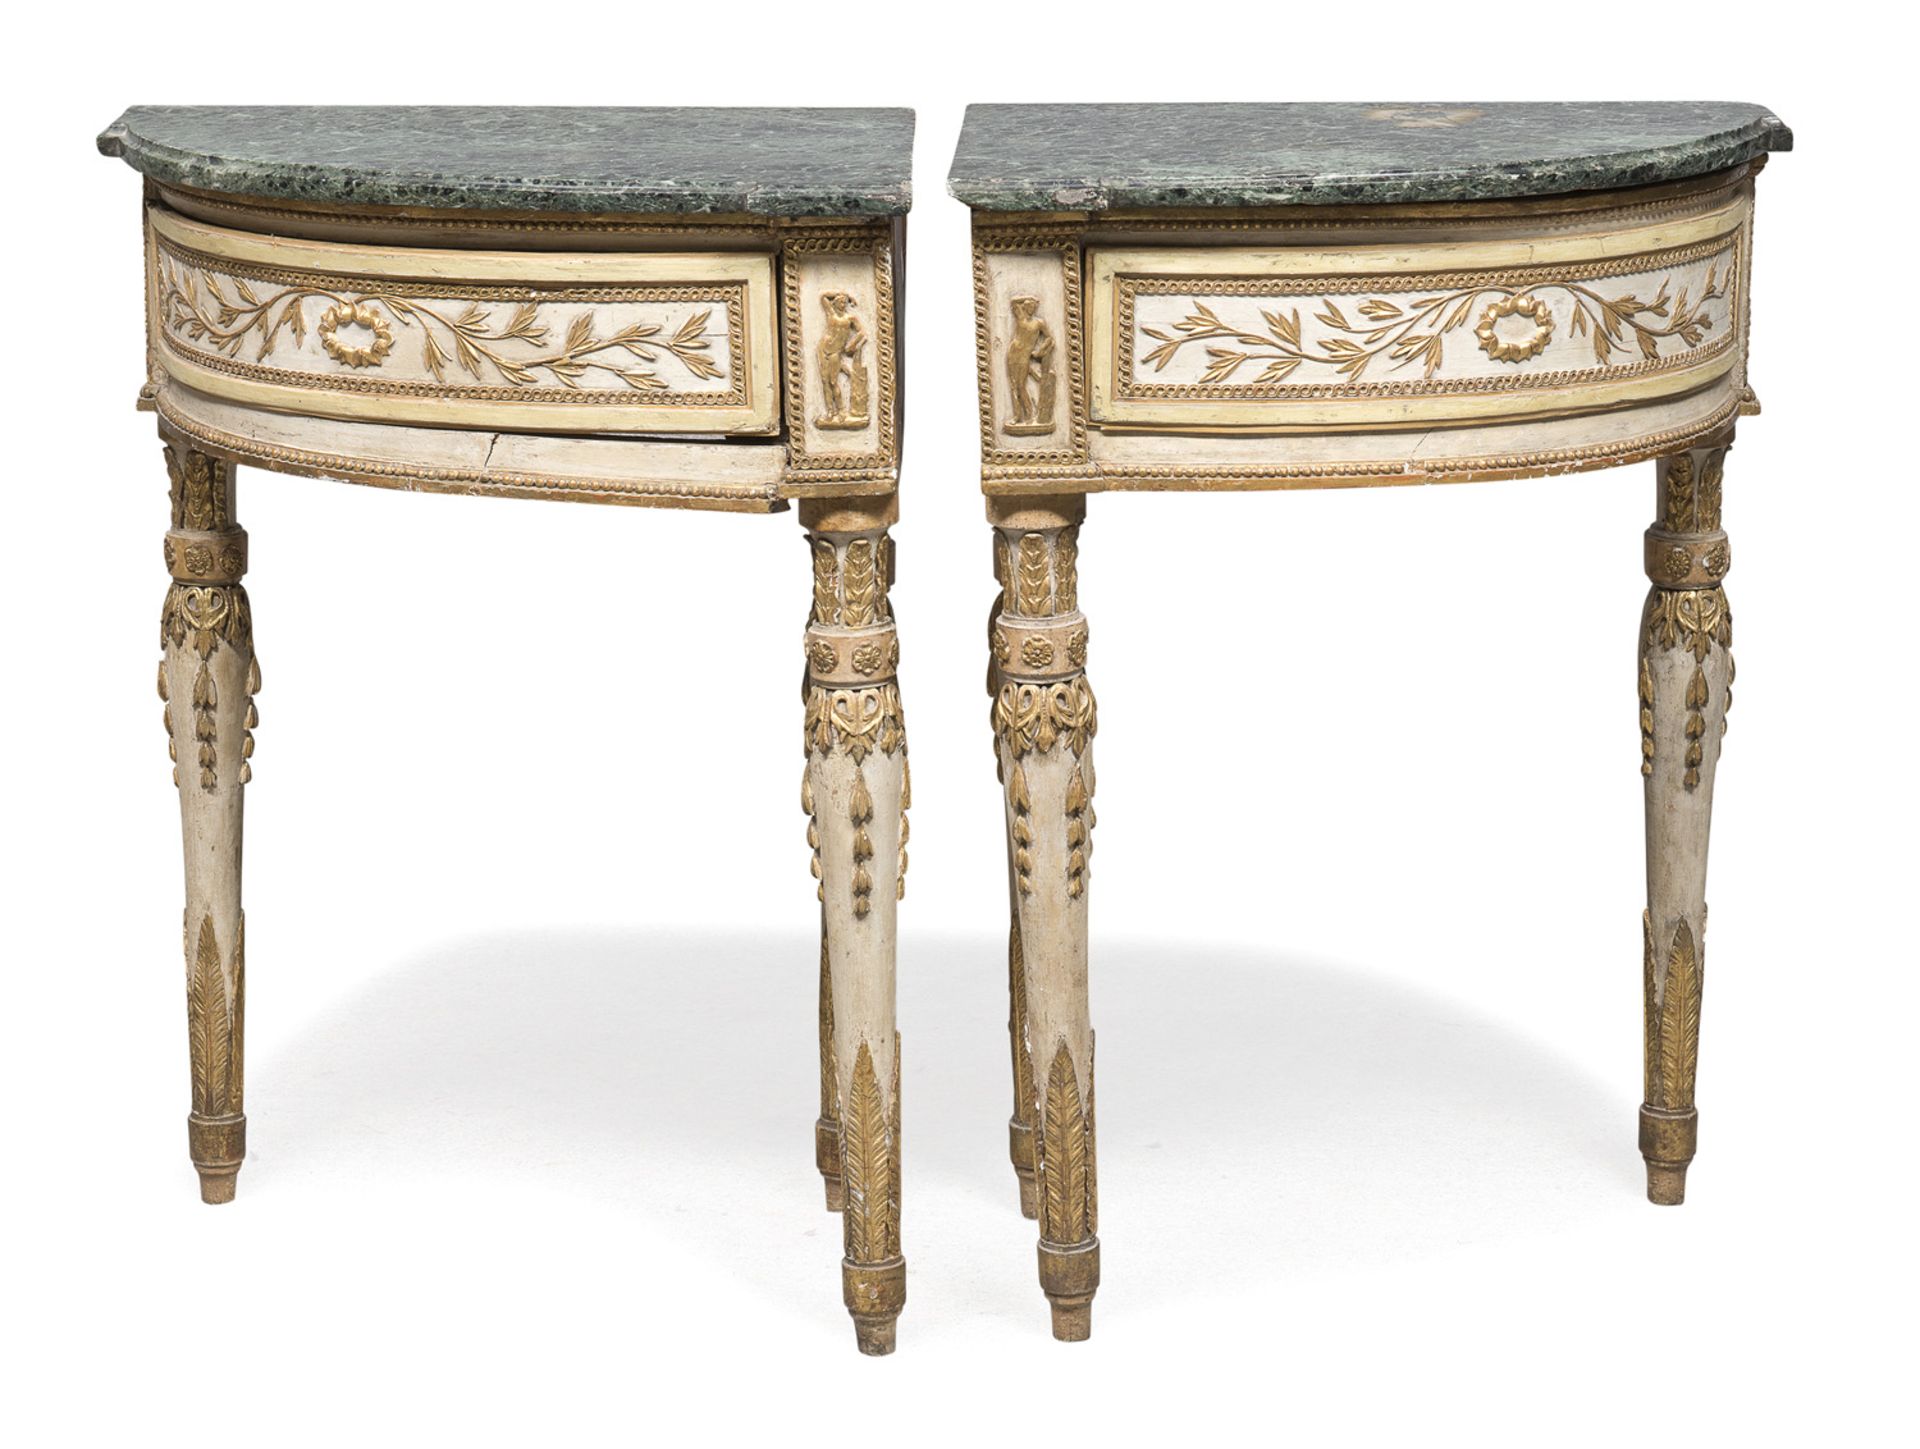 PAIR OF CORNER CONSOLES PROBABLY NAPLES LATE 18th CENTURY